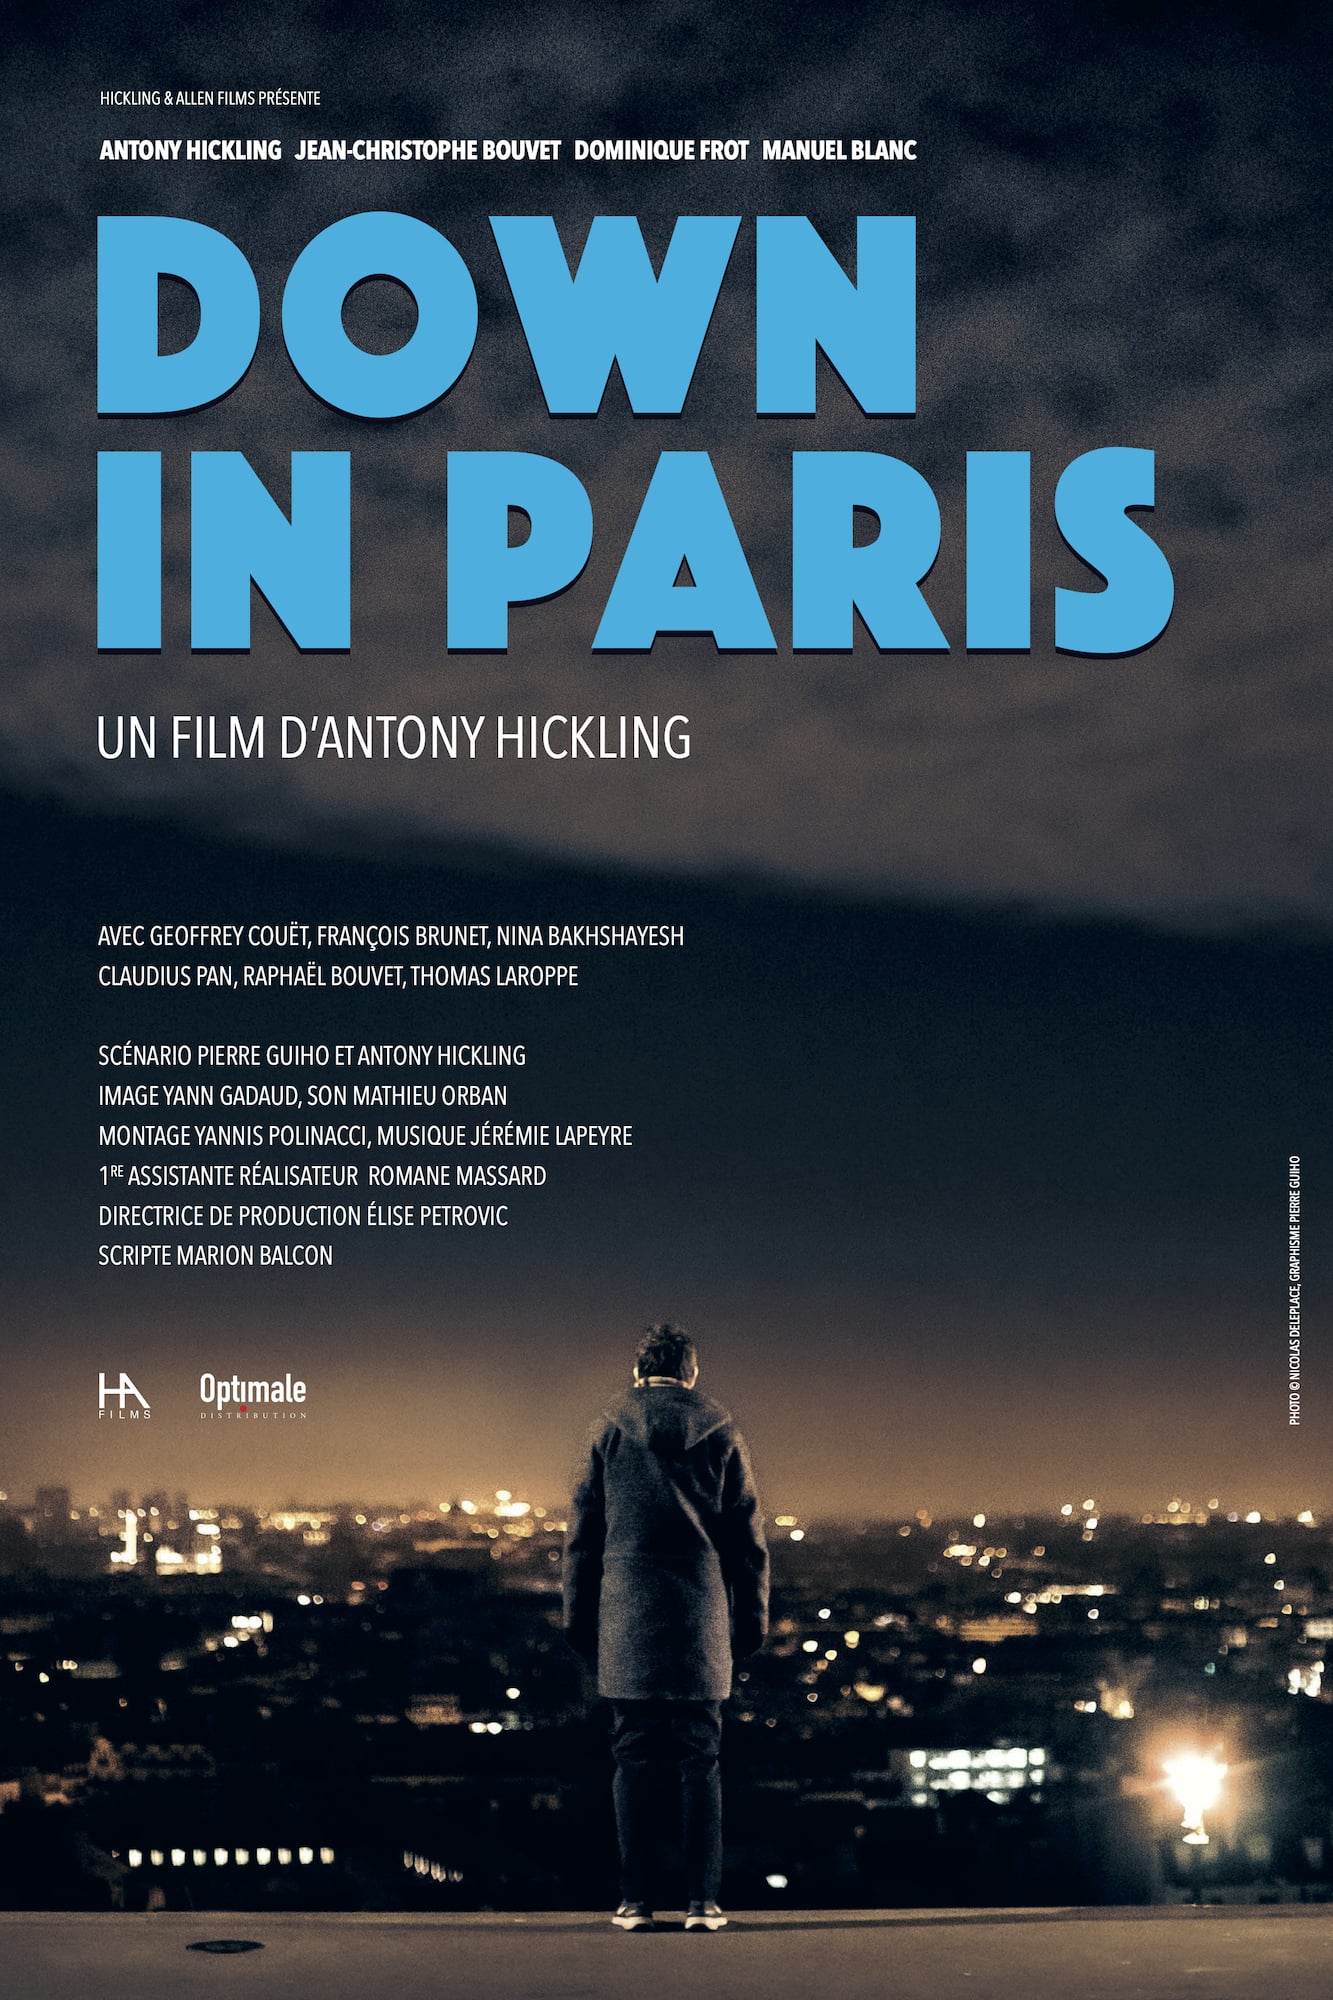 Poster for the movie "Down in Paris"